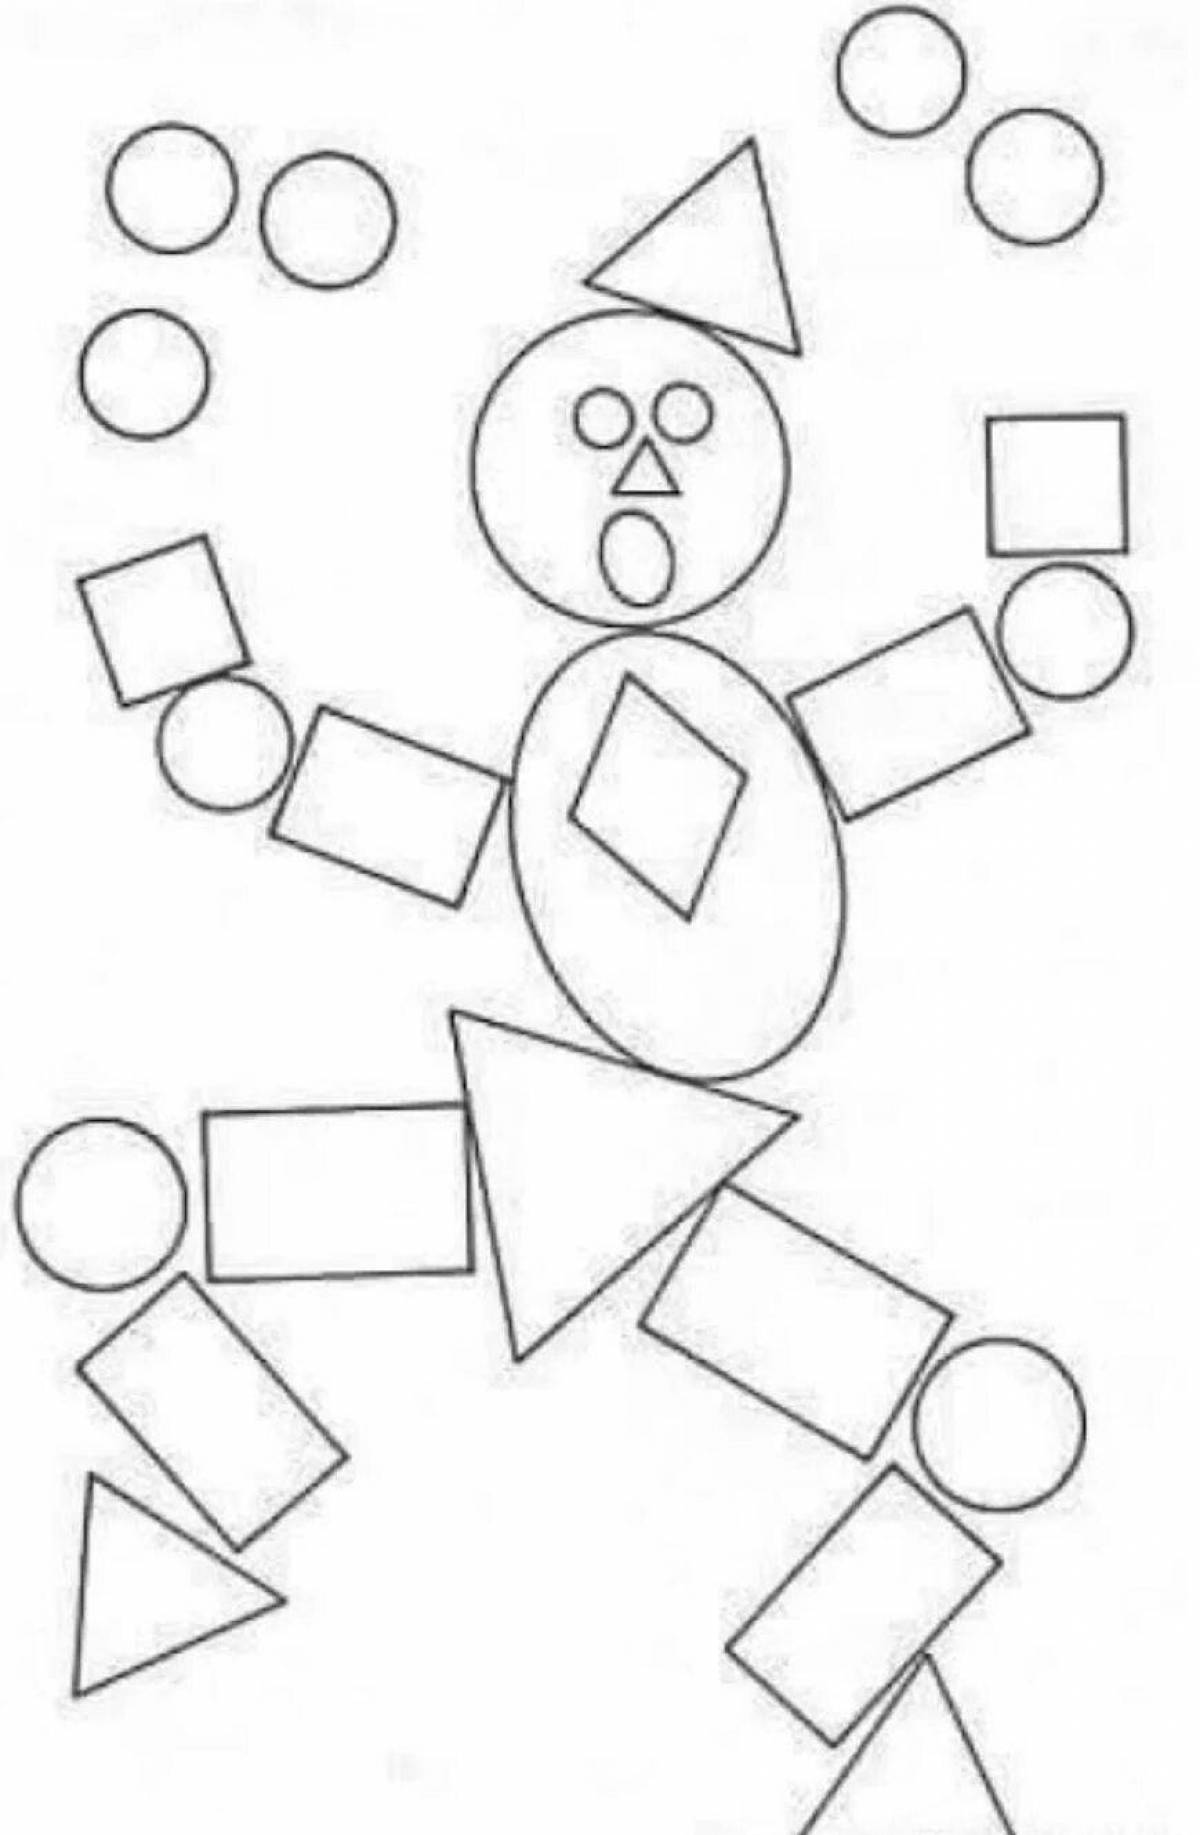 Creative middle group math coloring page